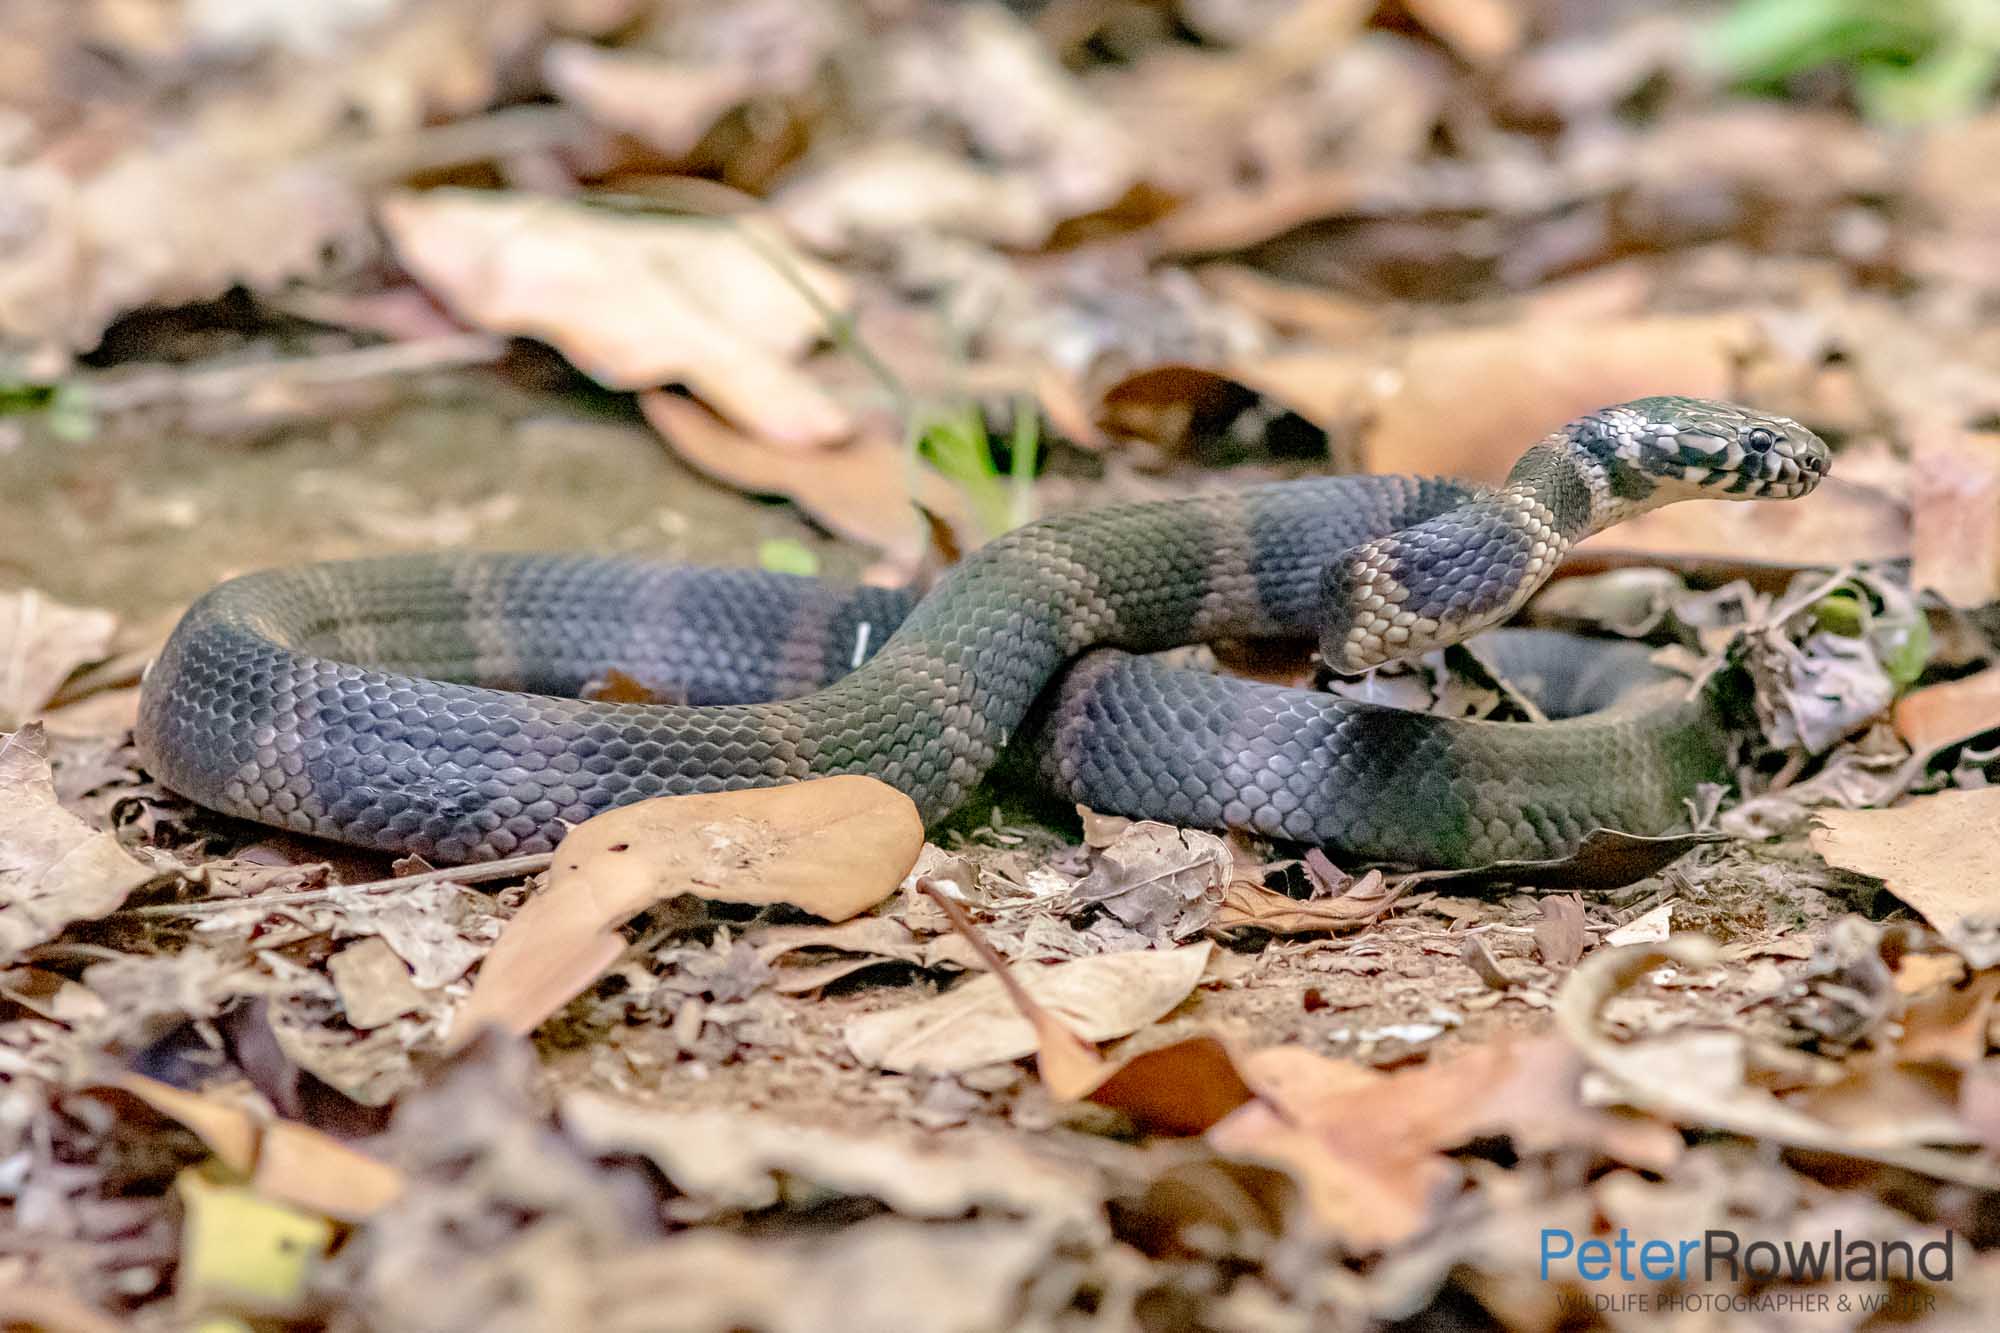 A Stephen's Banded Snake lightly coiled on the bush floor